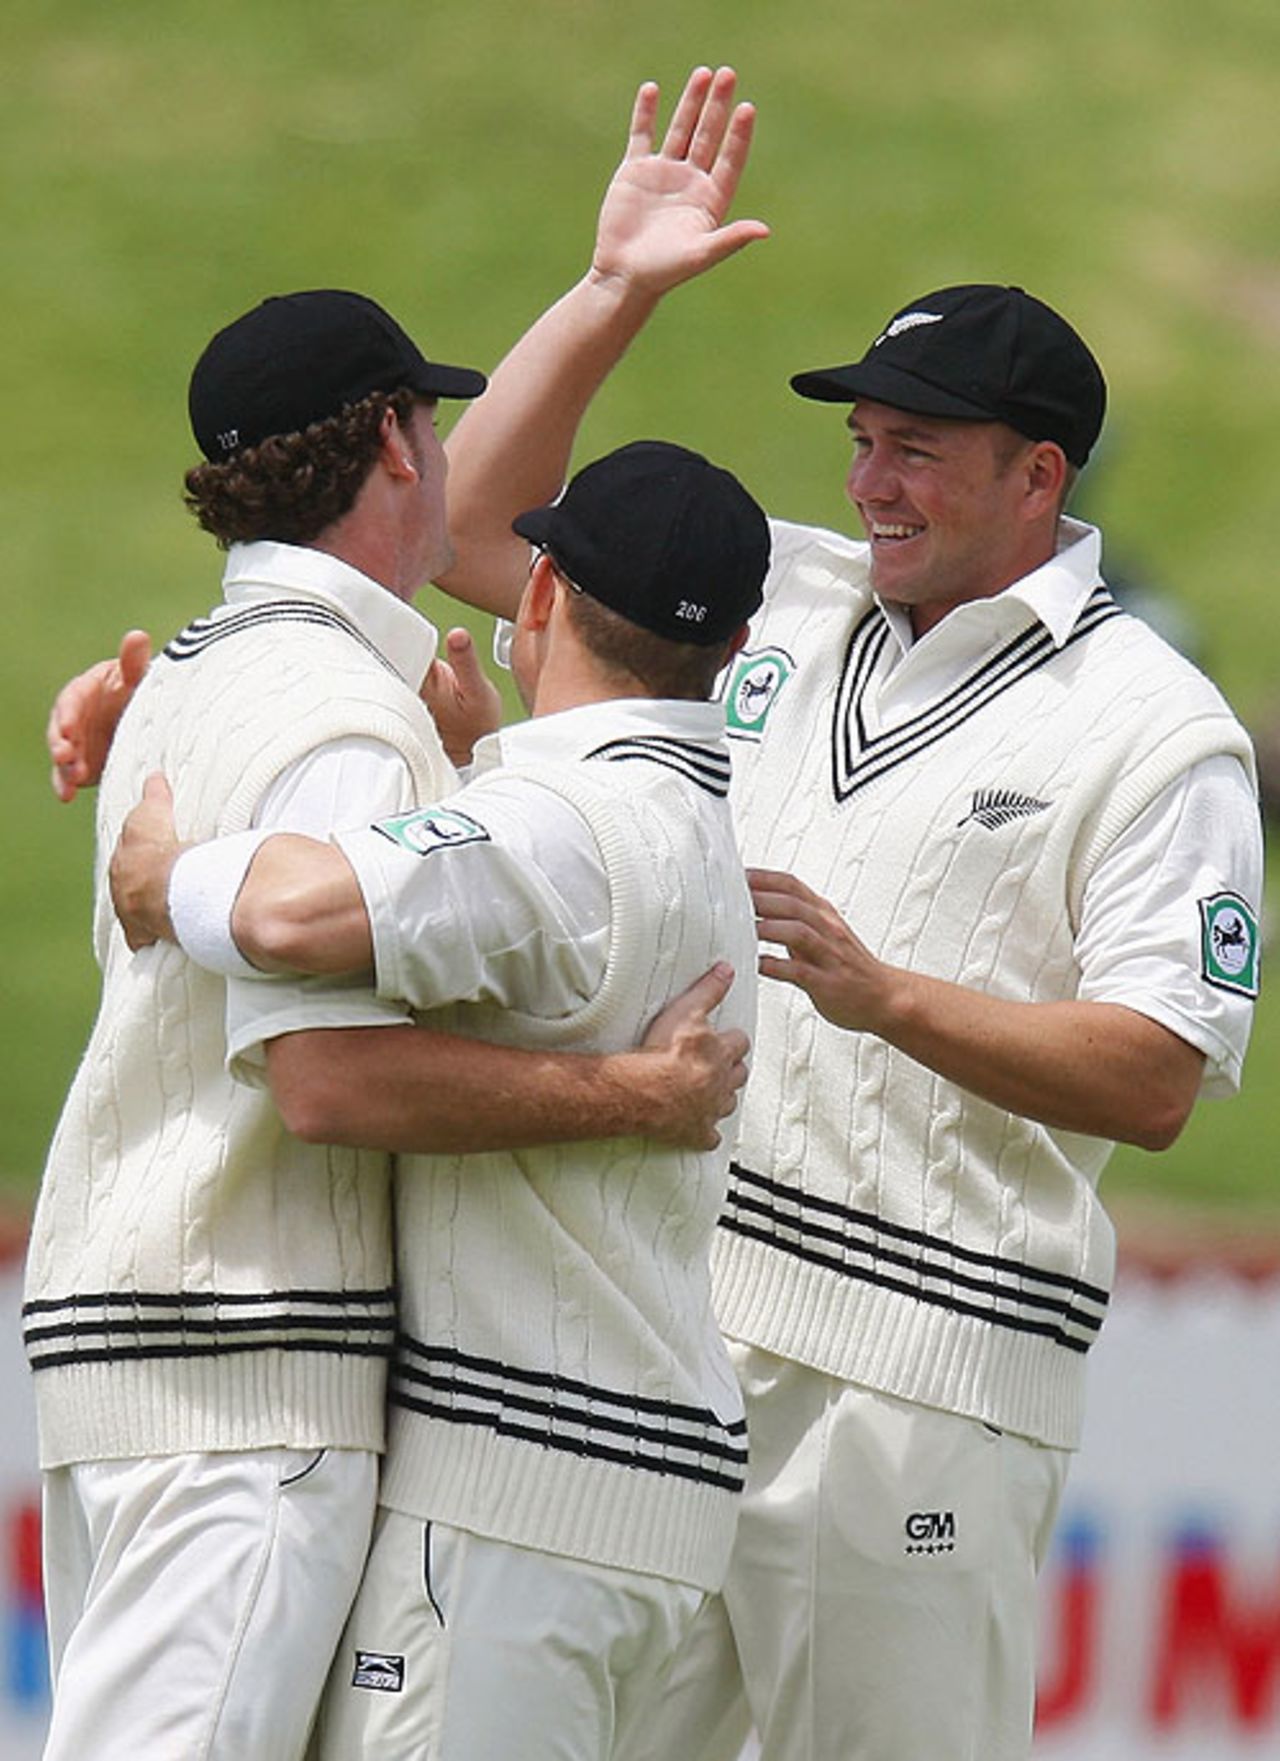 The New Zealanders celebrate another easy wicket, New Zealand v Bangladesh, 2nd Test, Wellington, 3rd day, January 14, 2008